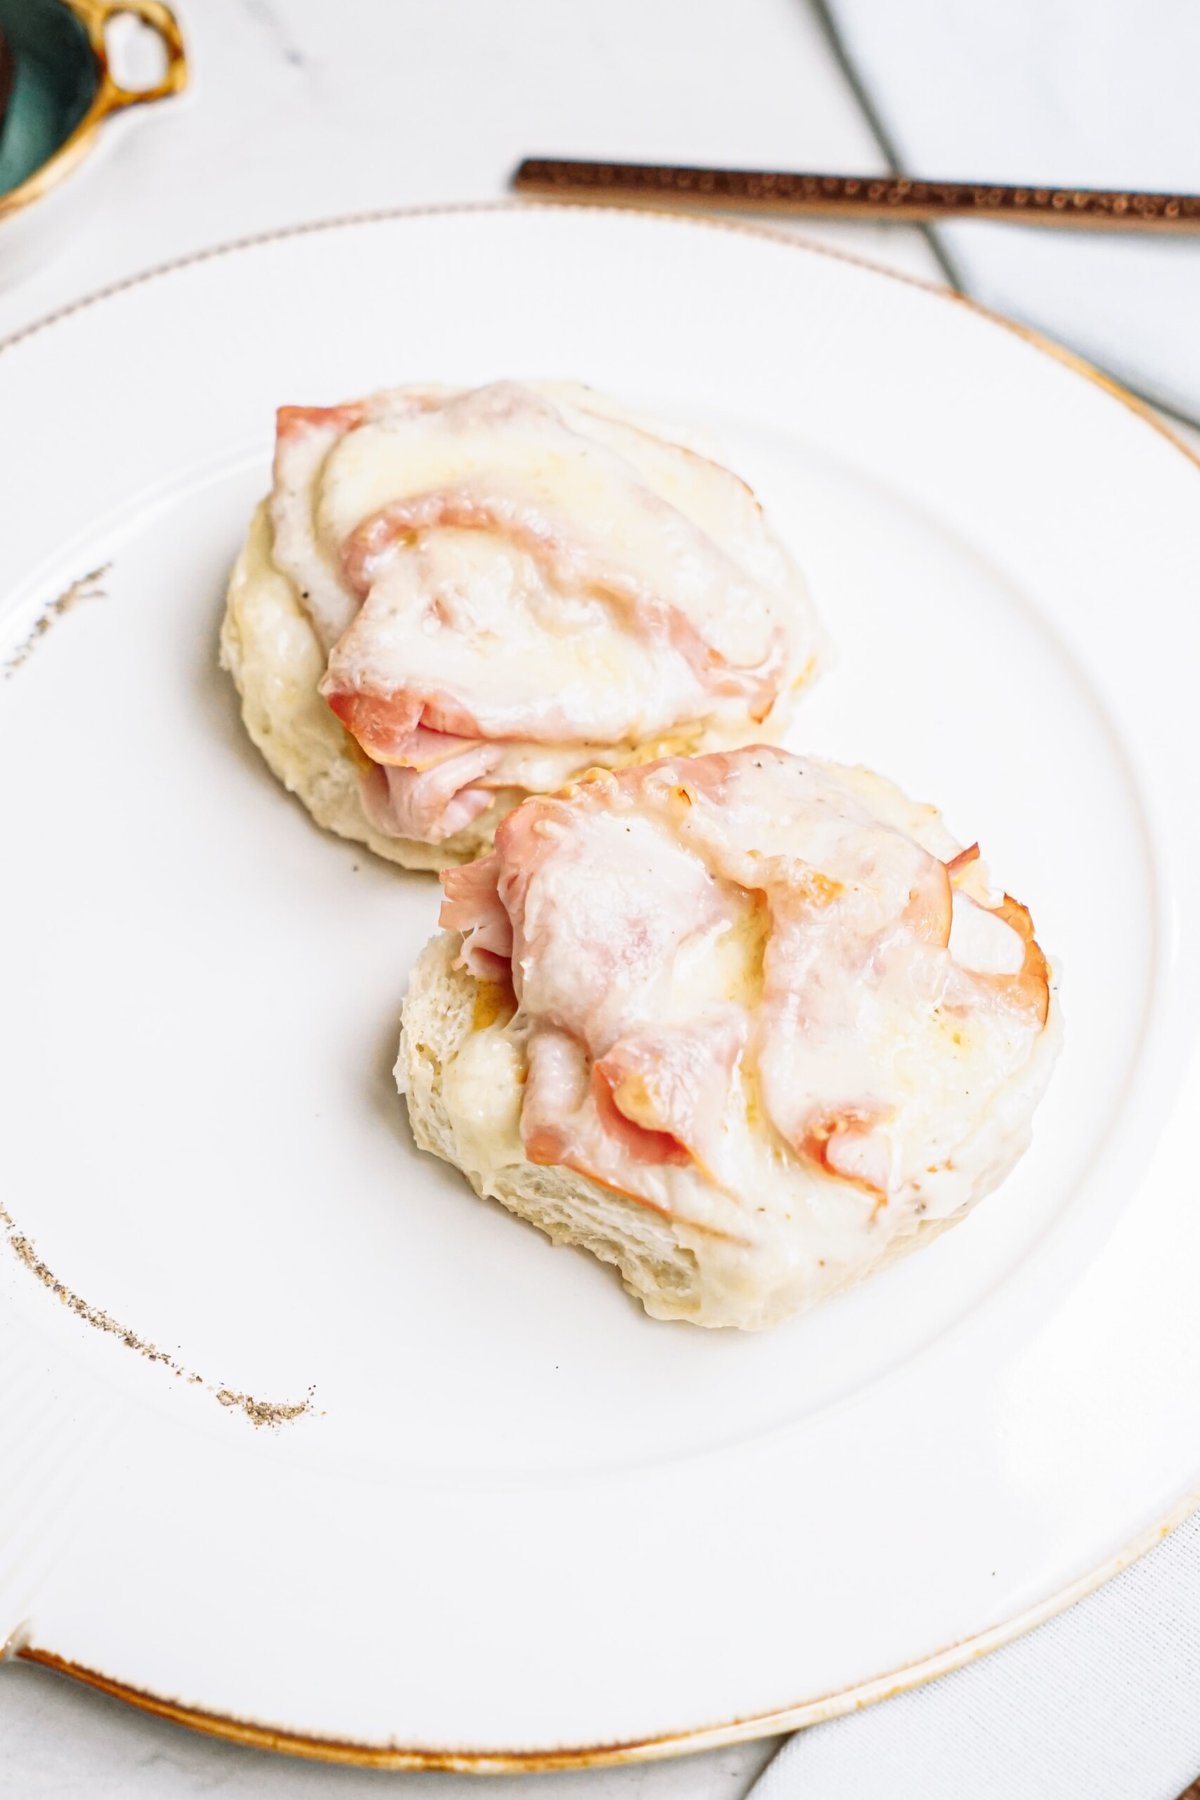 Two open-faced baked sandwiches with ham and melted cheese on a white plate.